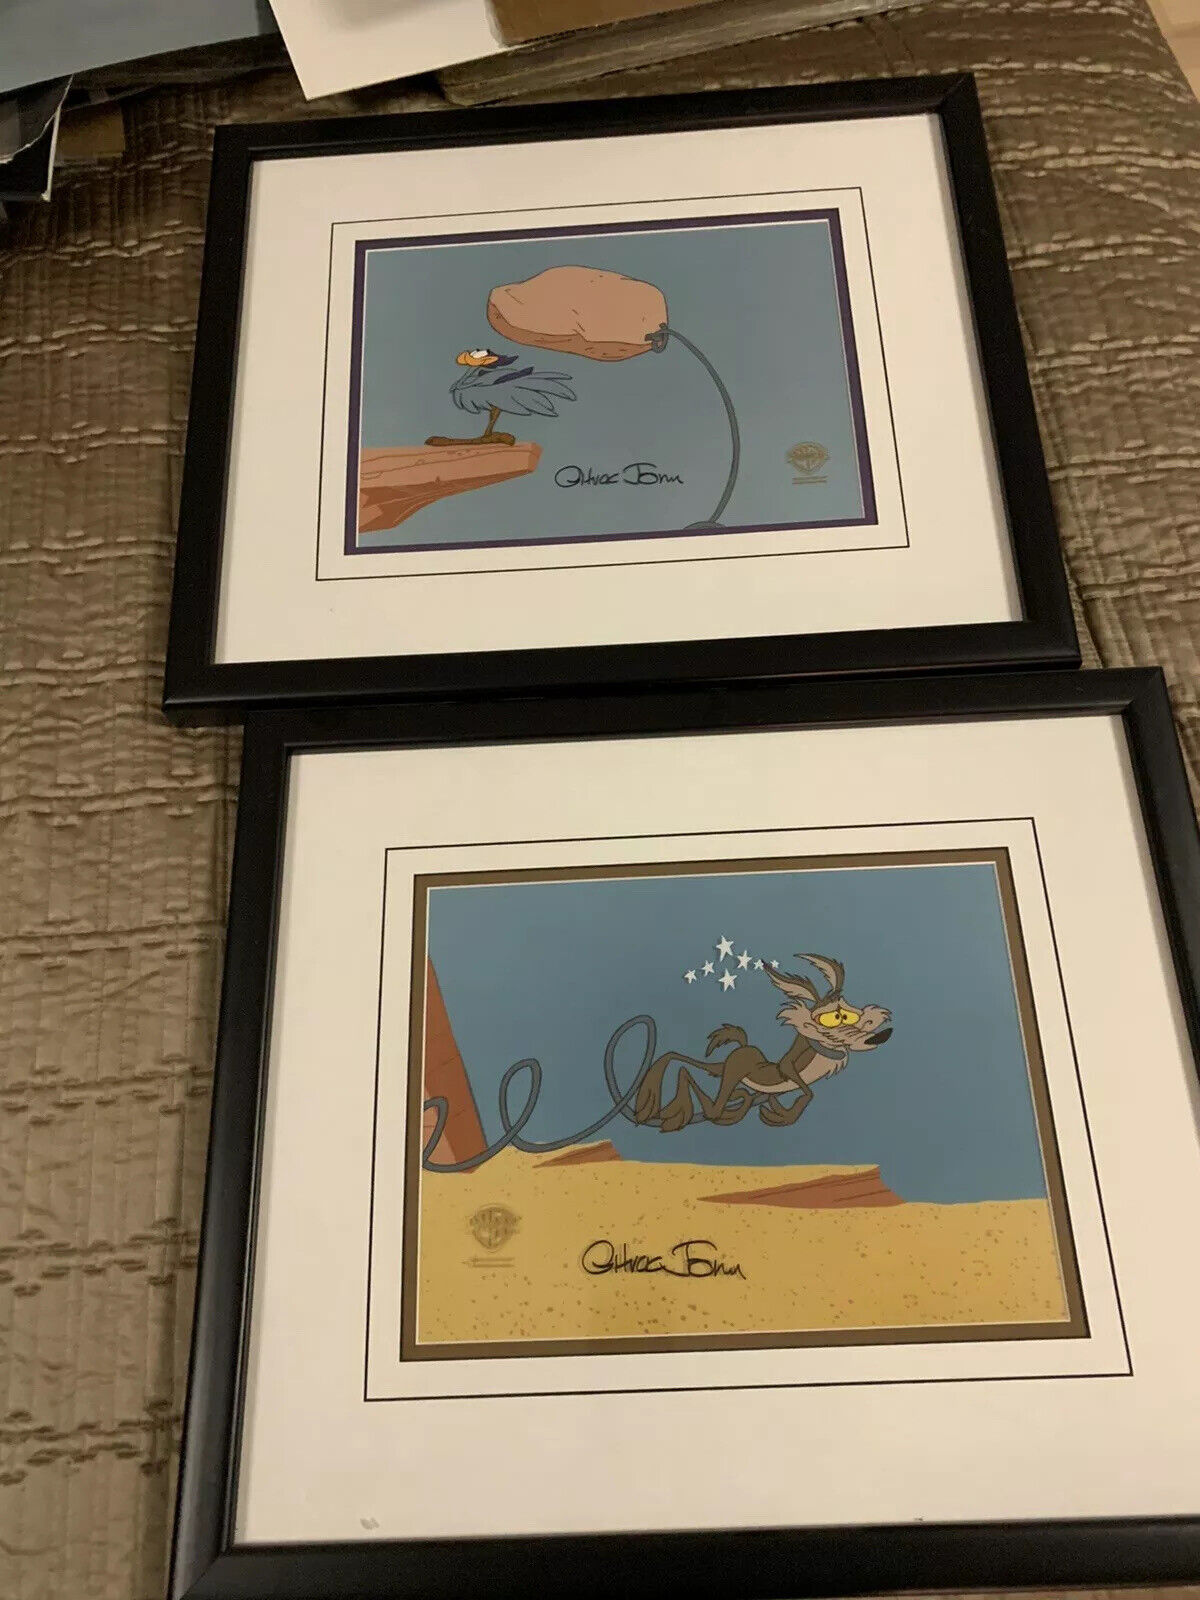 Road Runner & Wile E Coyote Cells Chariots of Fur Signed by Chuck Jones 